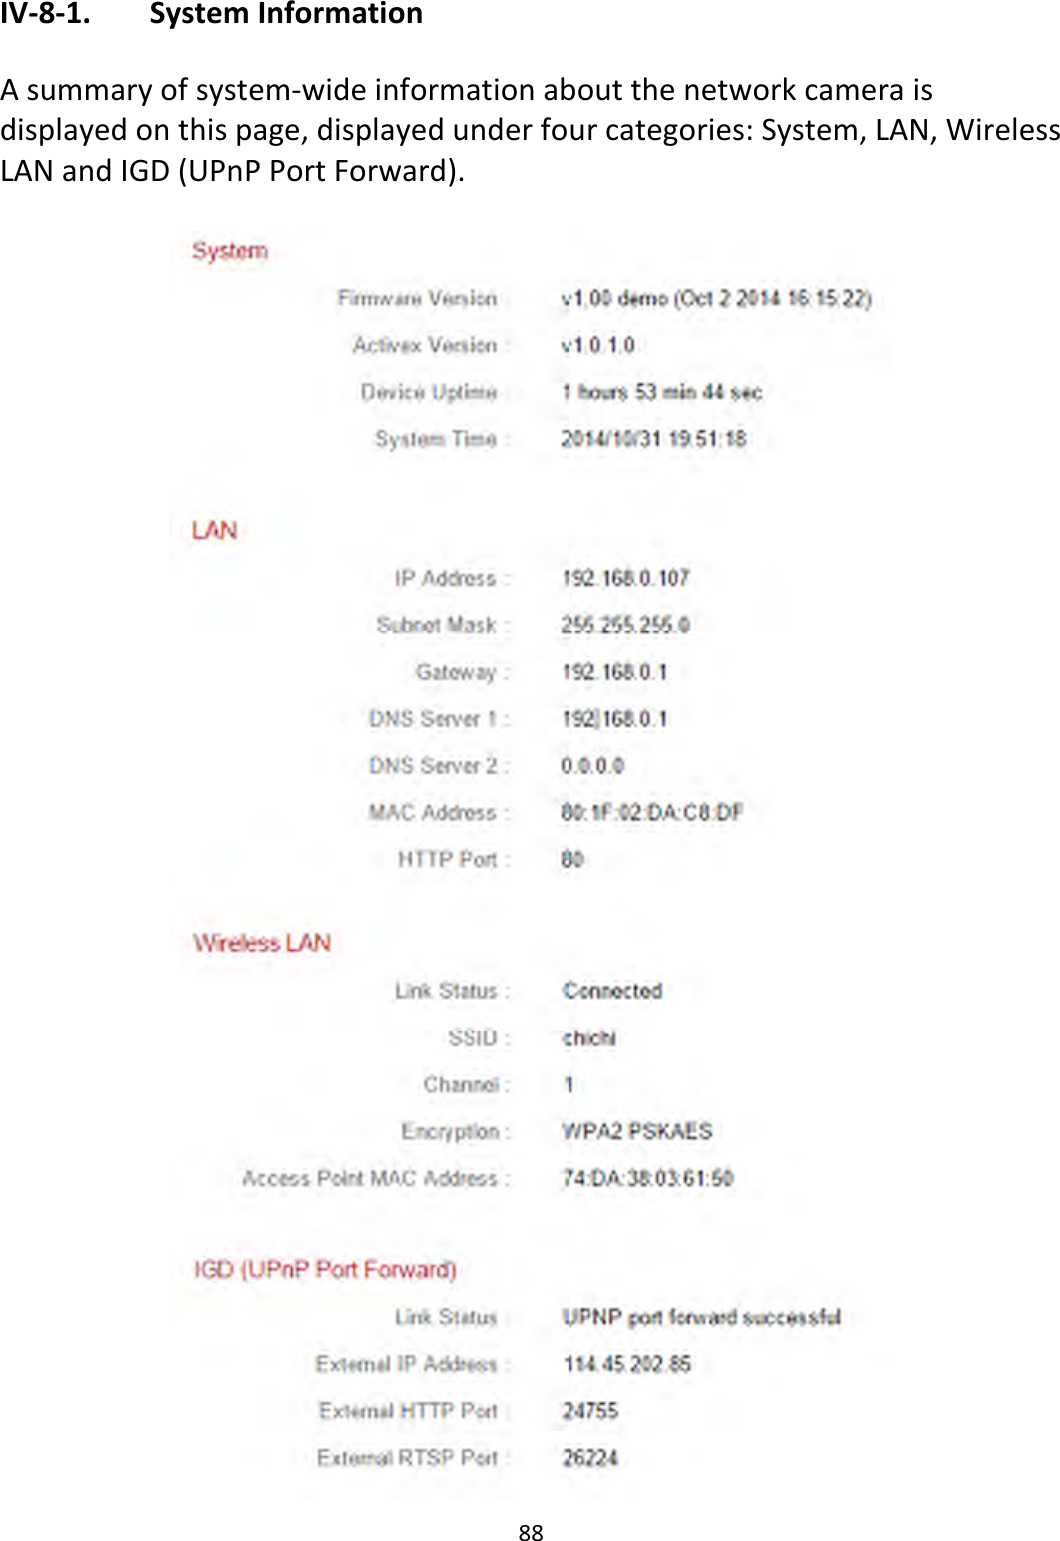 88  IV-8-1.   System Information  A summary of system-wide information about the network camera is displayed on this page, displayed under four categories: System, LAN, Wireless LAN and IGD (UPnP Port Forward).   